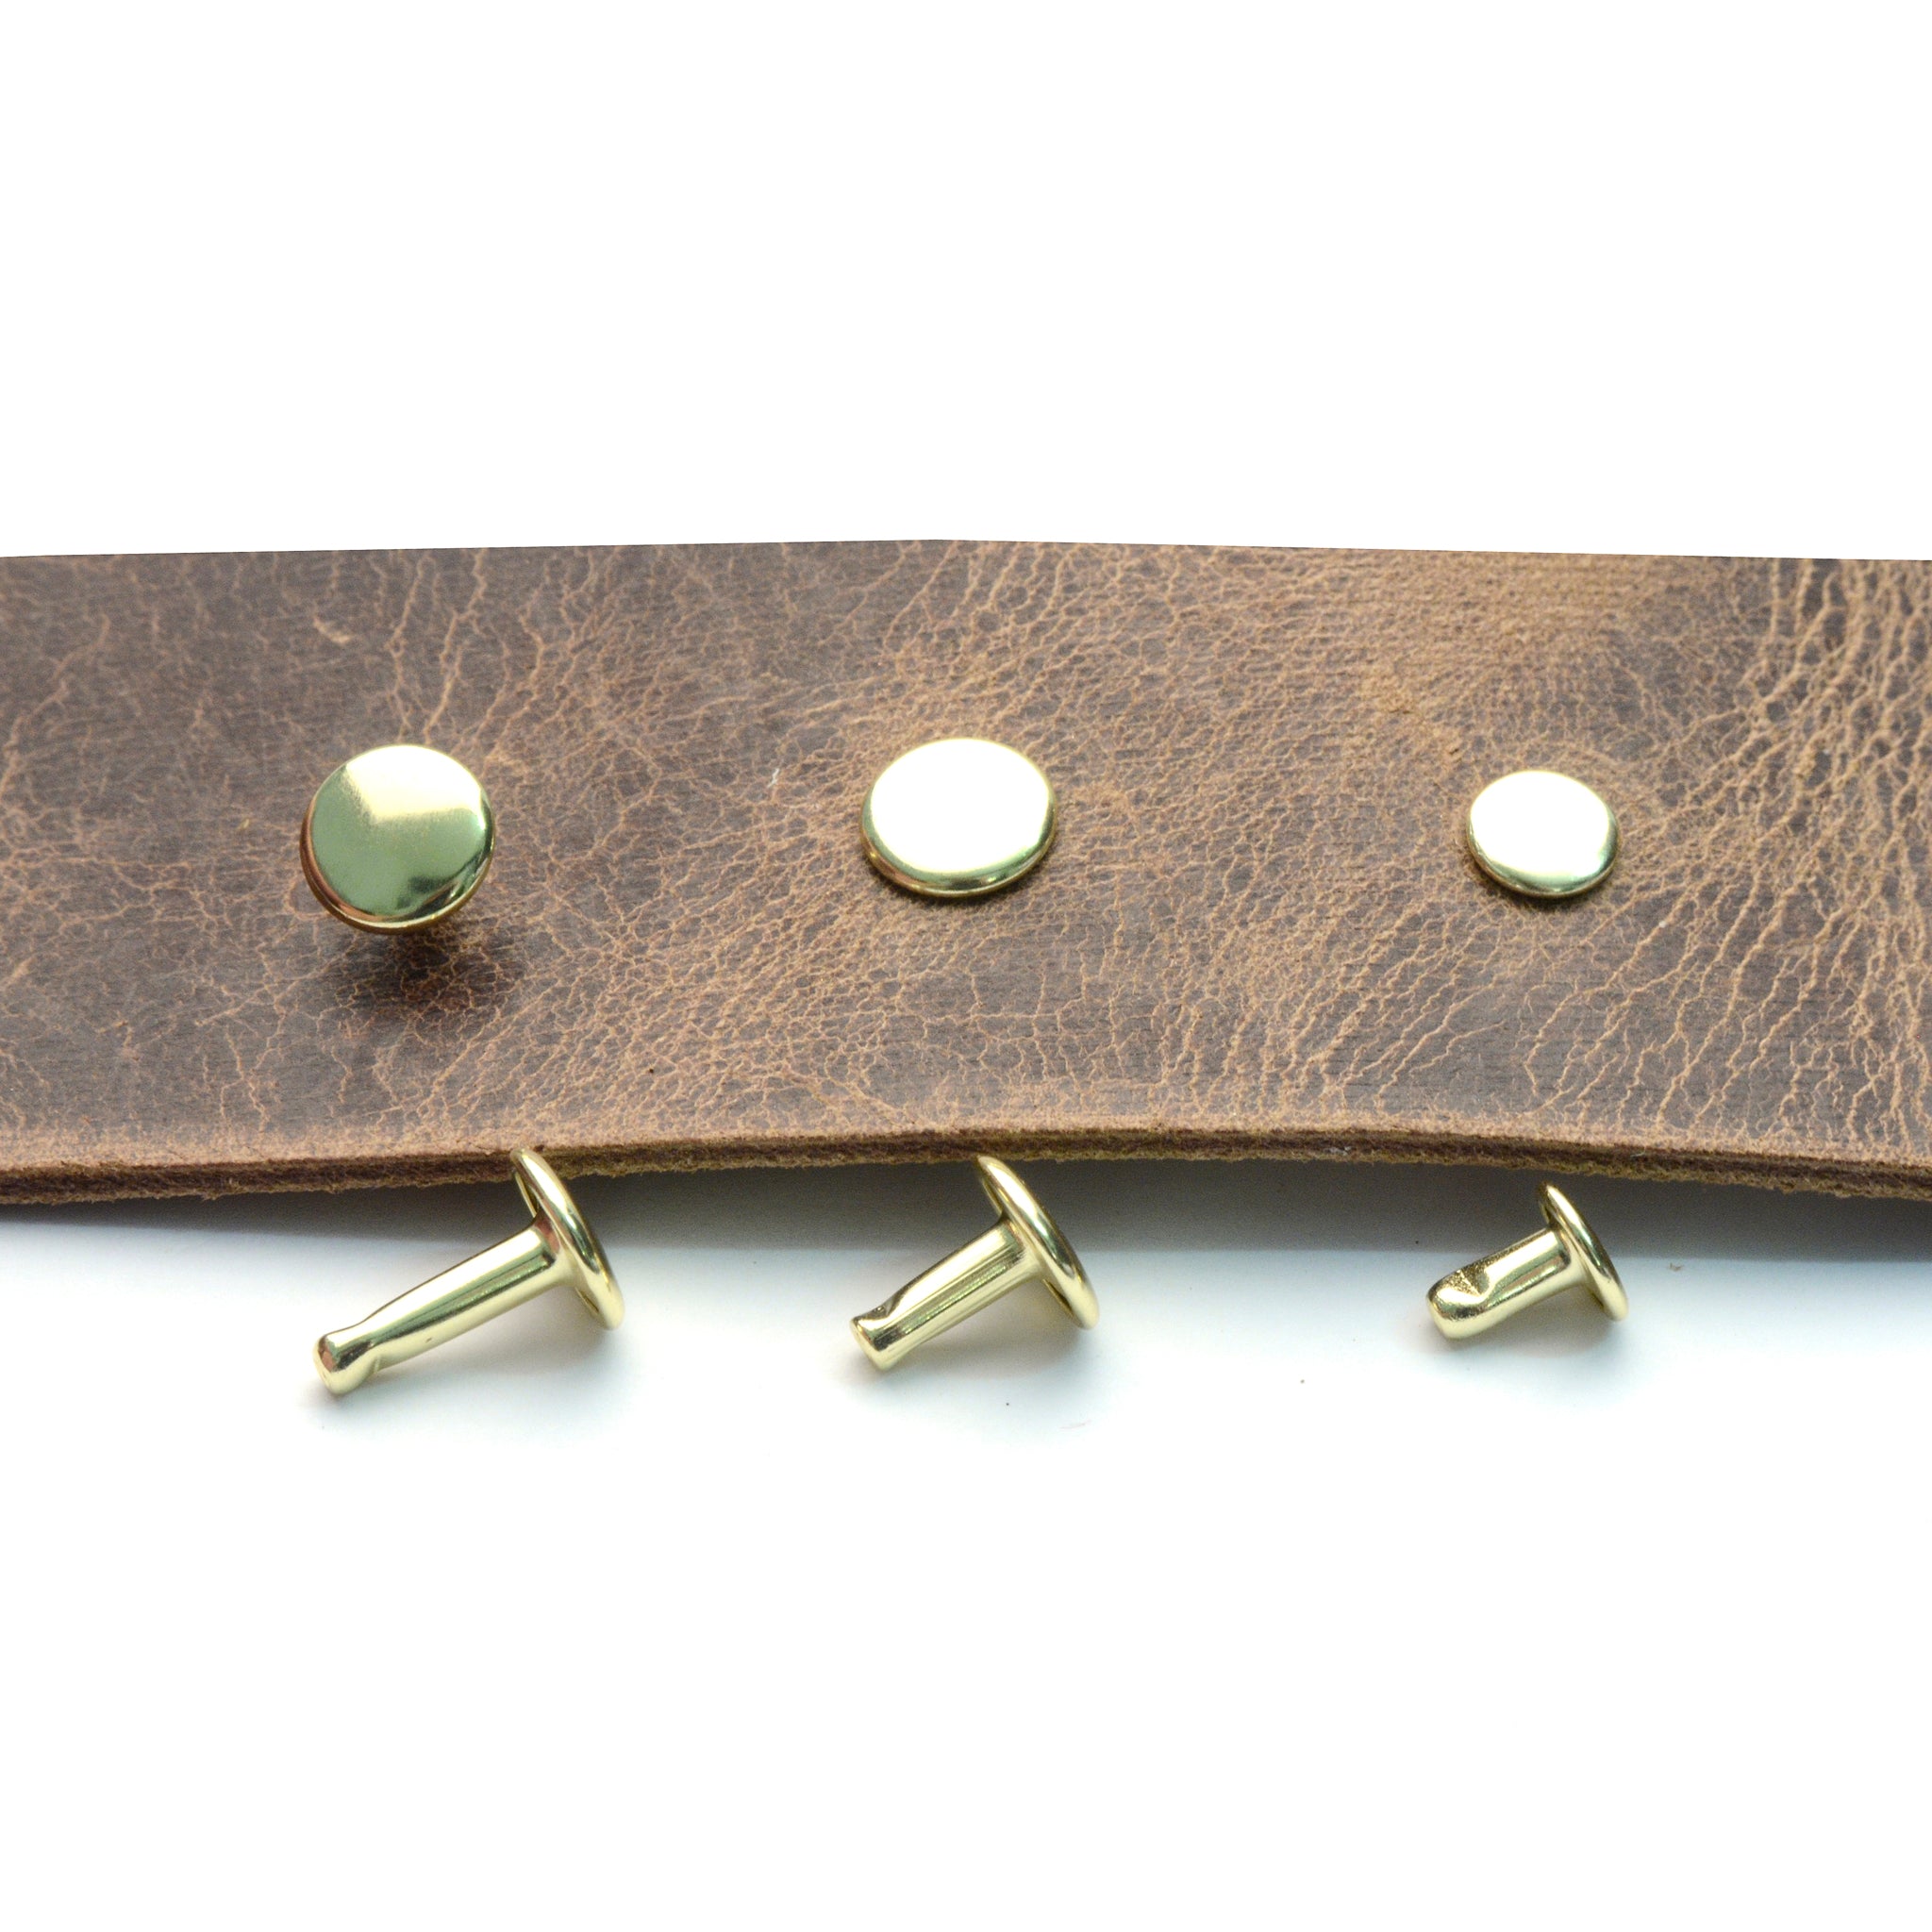 Brass Double Cap Rivets from Identity Leathercraft